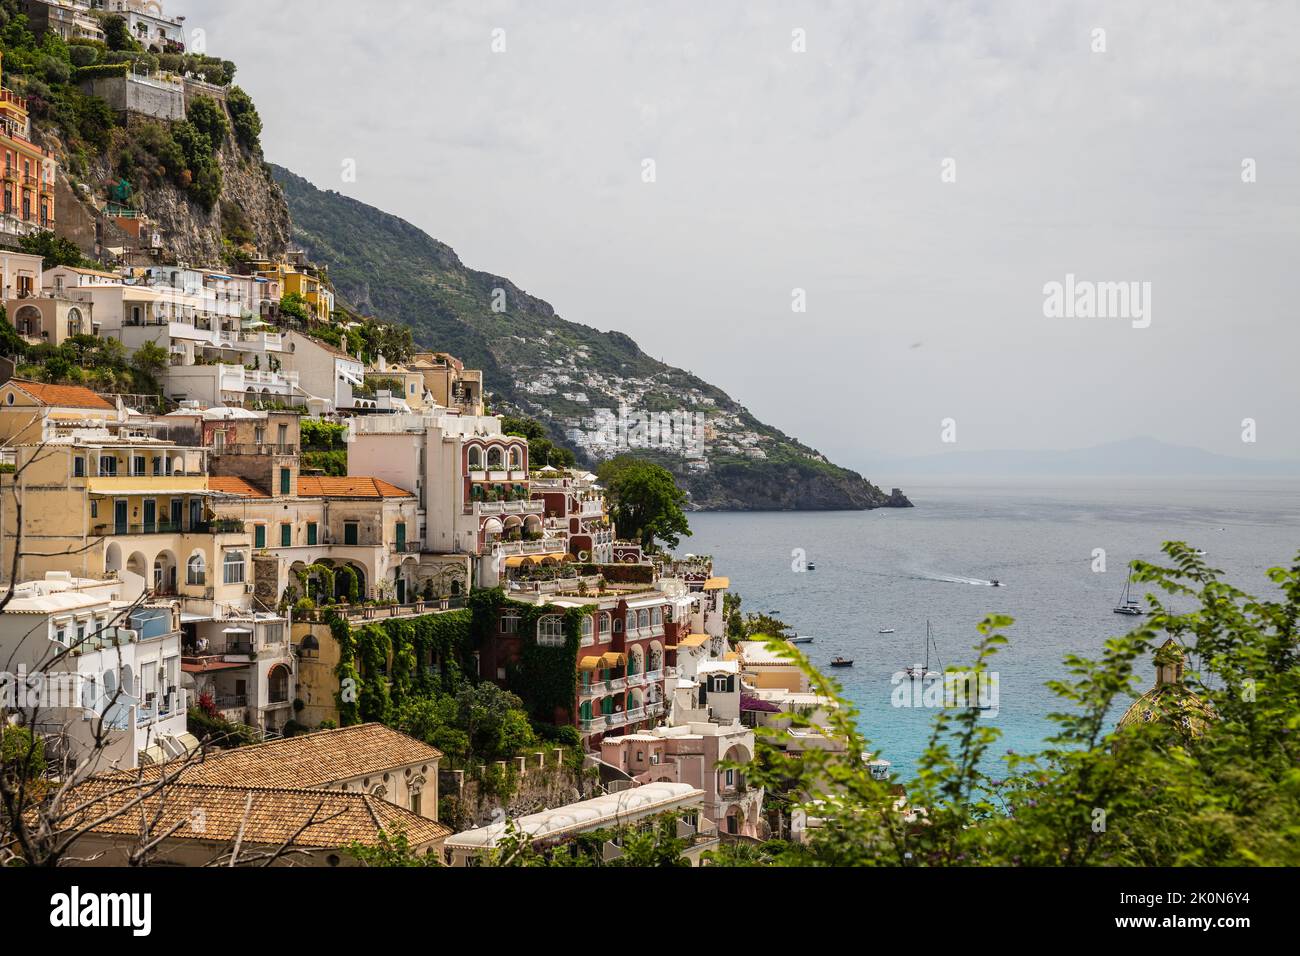 The beautiful and rural cliff side town of Positano on the Amalfi Coast of Italy, Europe. Stock Photo